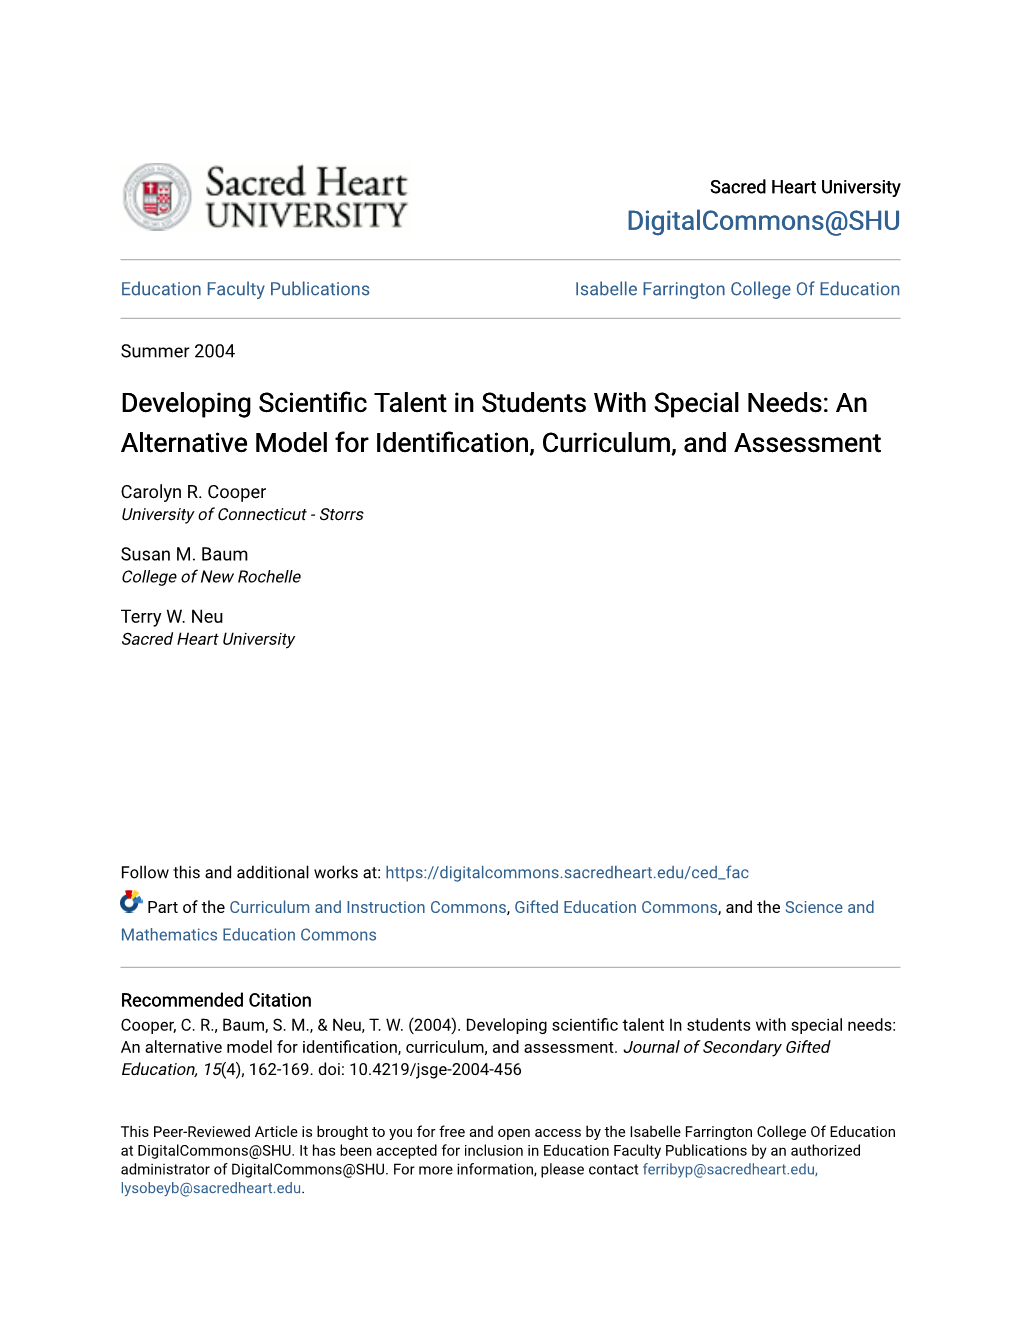 Developing Scientific Talent in Students with Special Needs: an Alternative Model for Identification, Curriculum, and Assessment